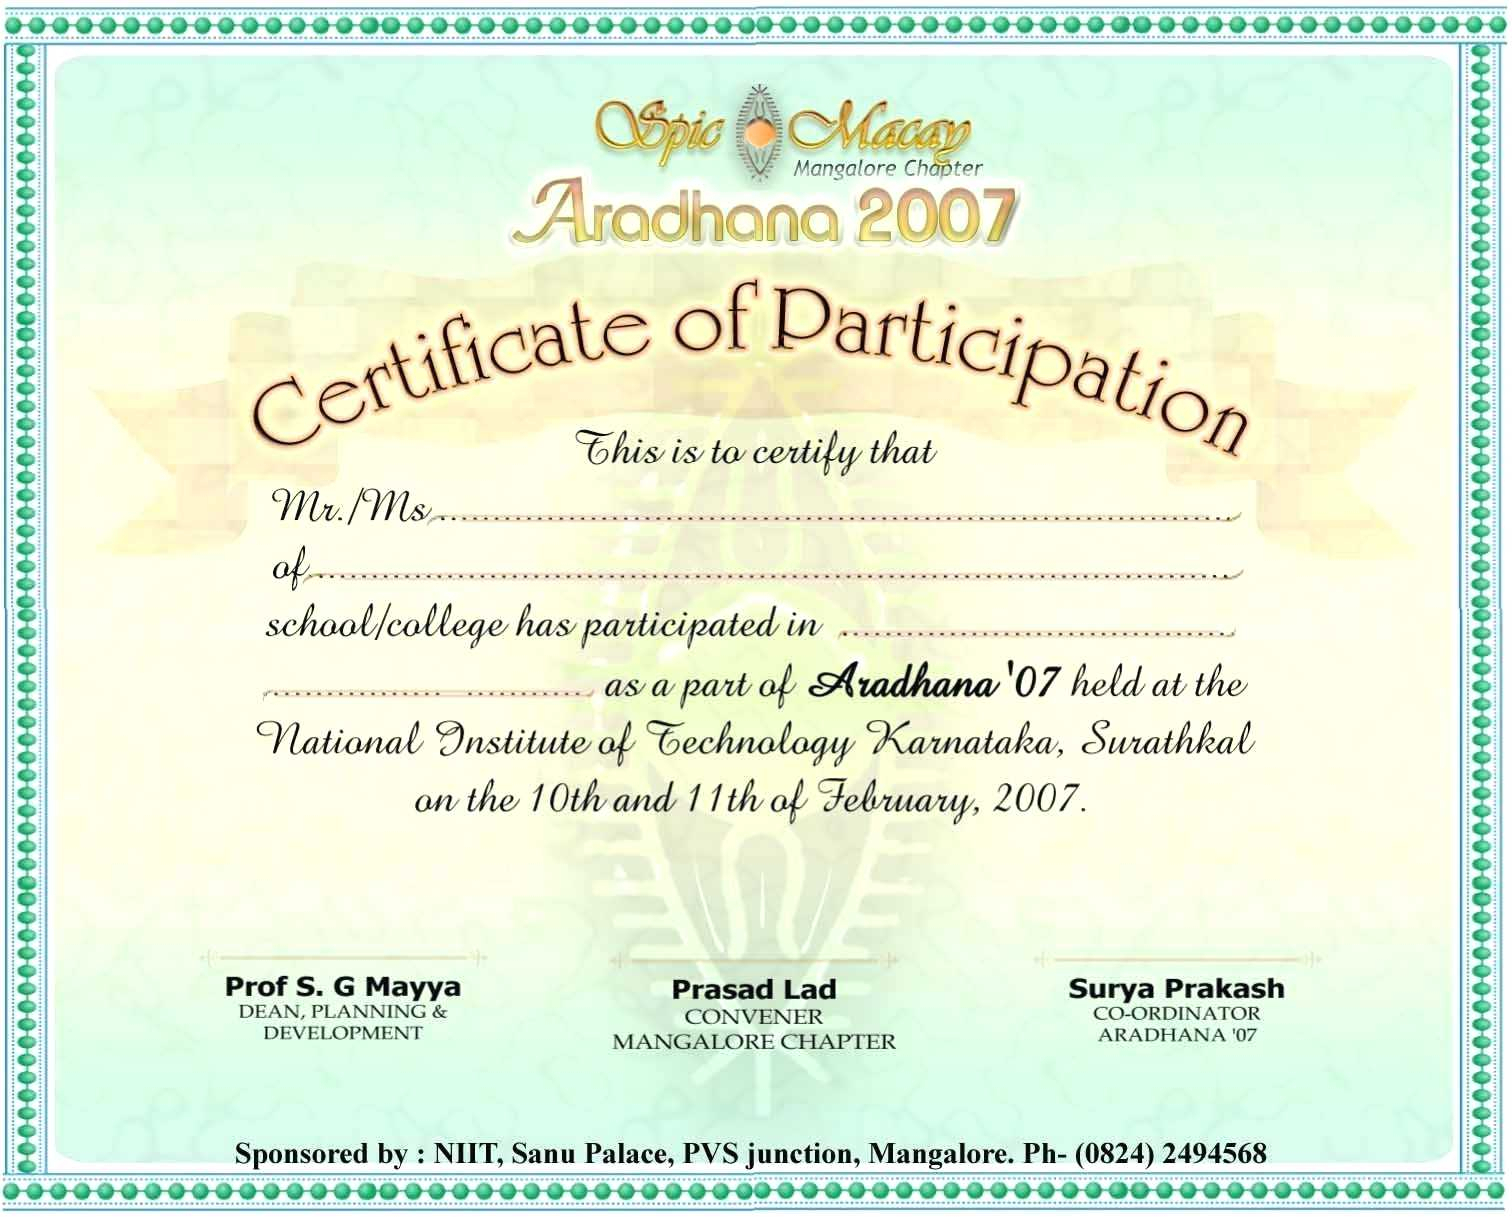 Conference Participation Certificate Template – Bizoptimizer Regarding Conference Participation Certificate Template